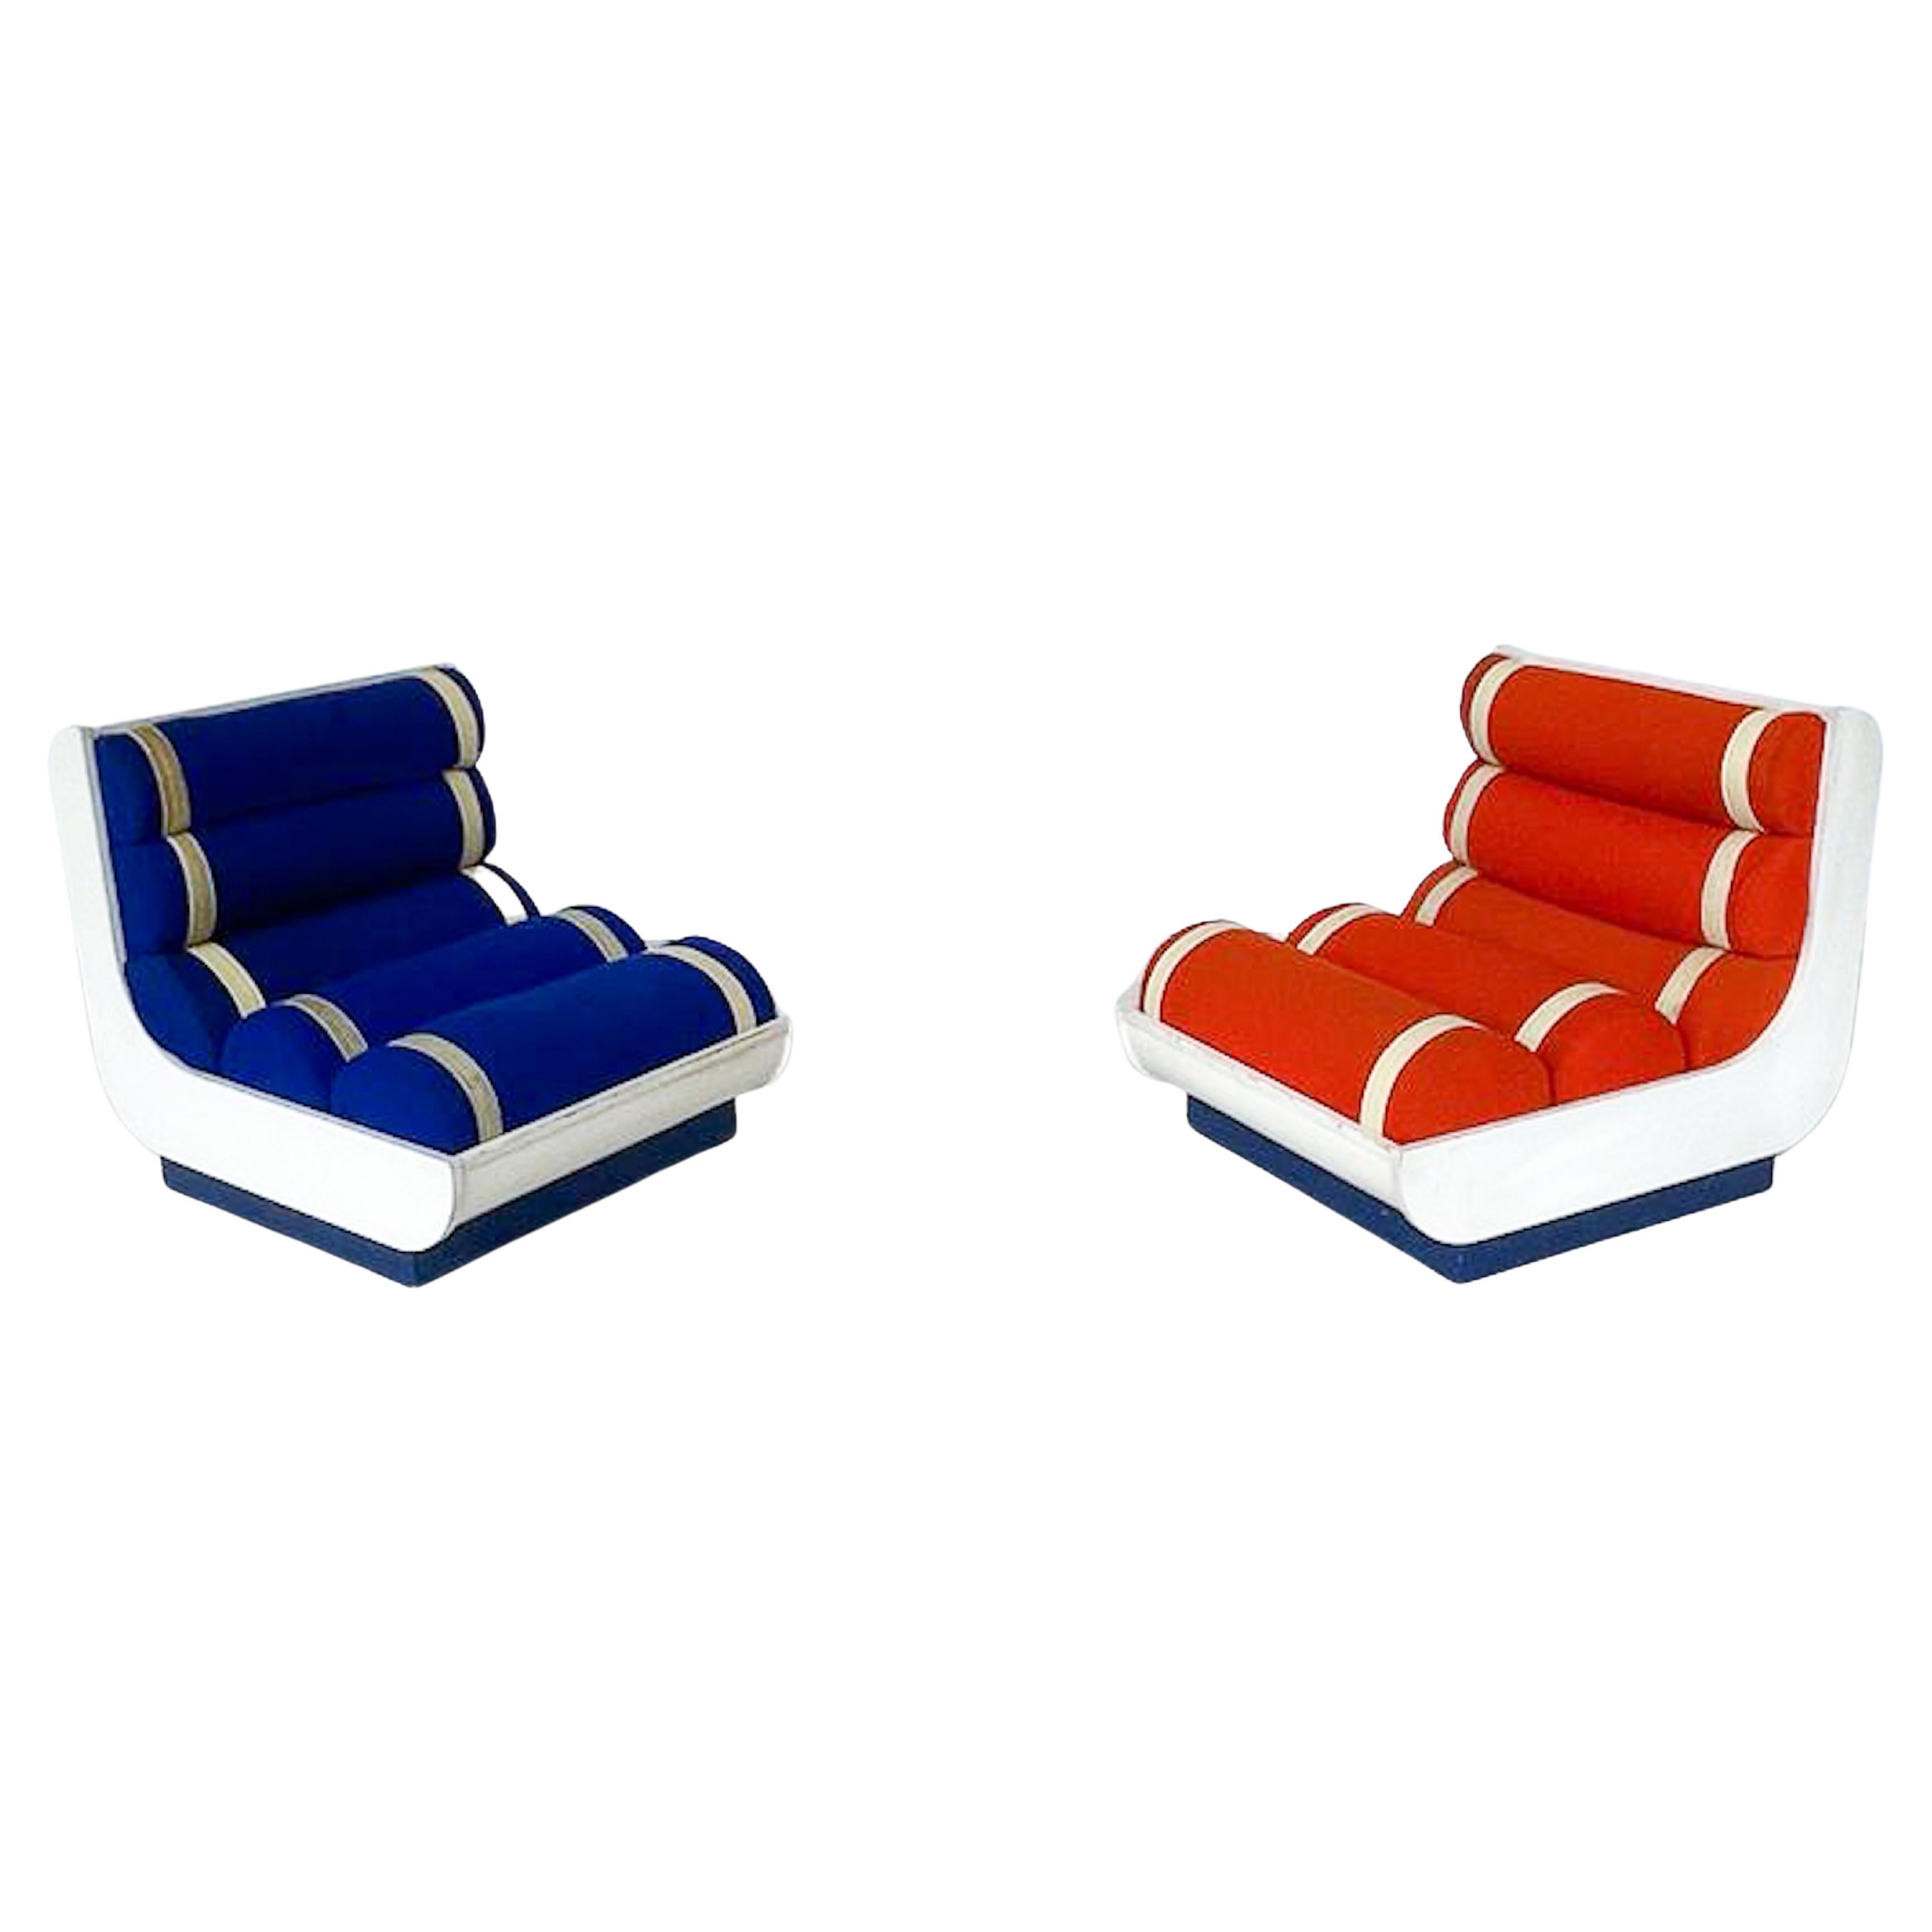 Mid-Century Modern Pair of Italian Red and Blue Armchairs, 1960s For Sale